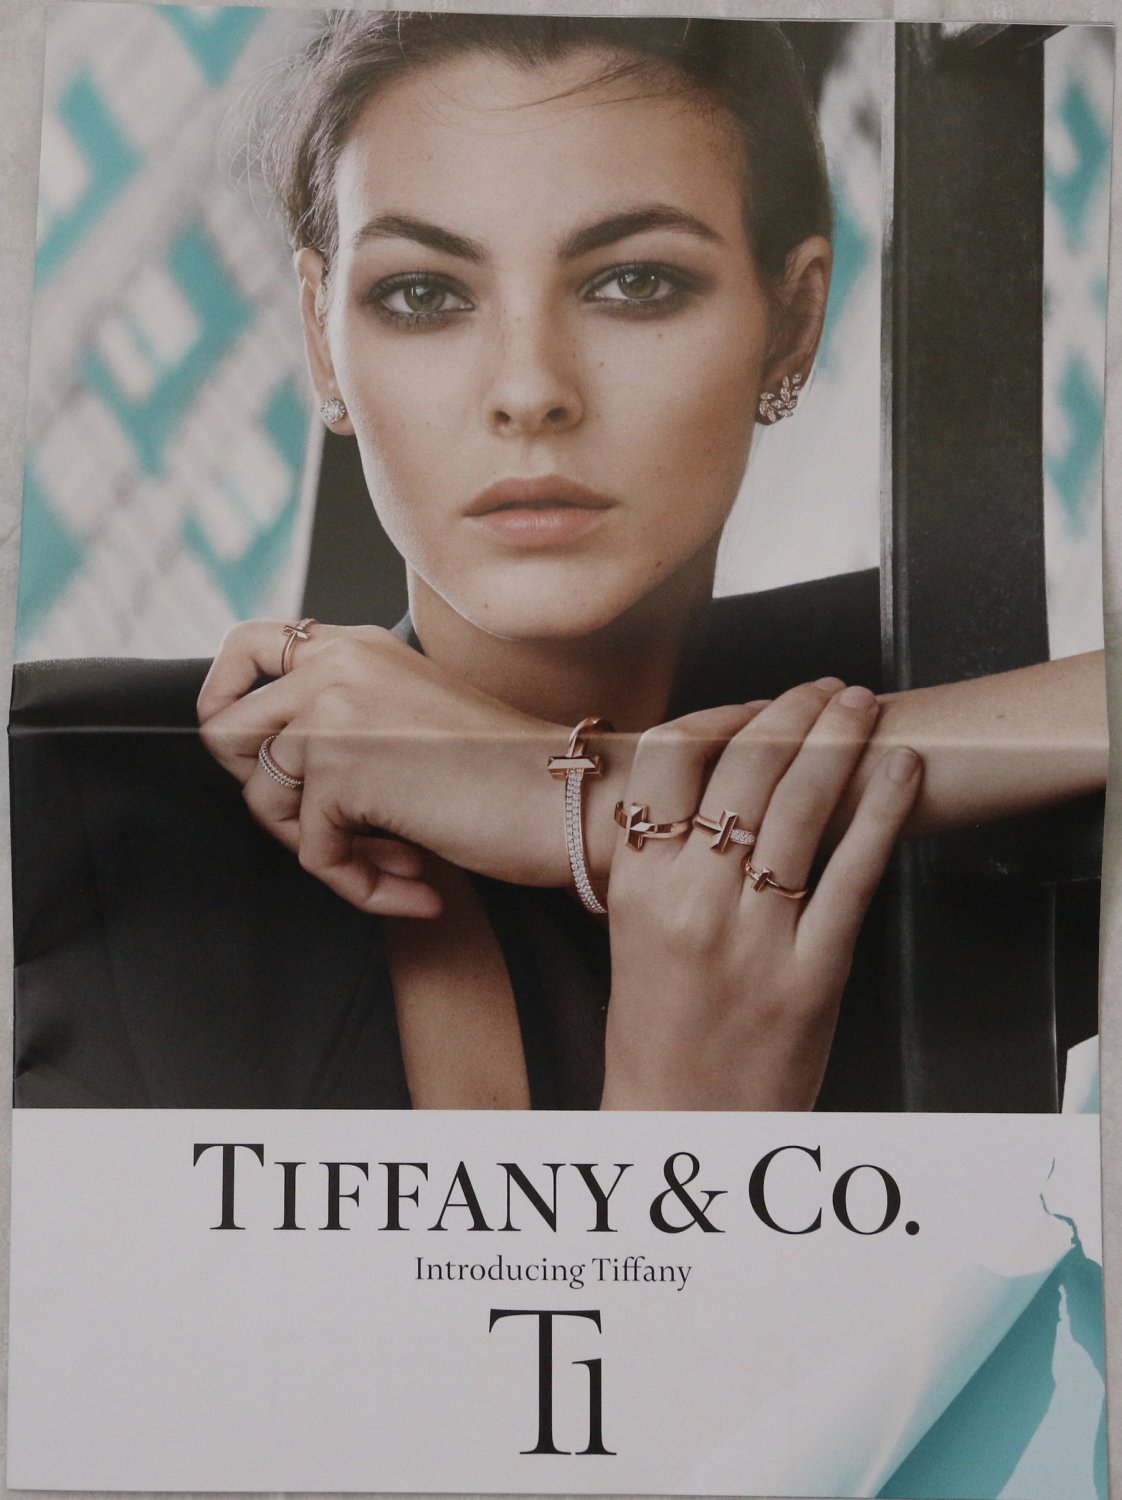 Tiffany & Co. 2020 Catalog Introducing T1 Jewelry